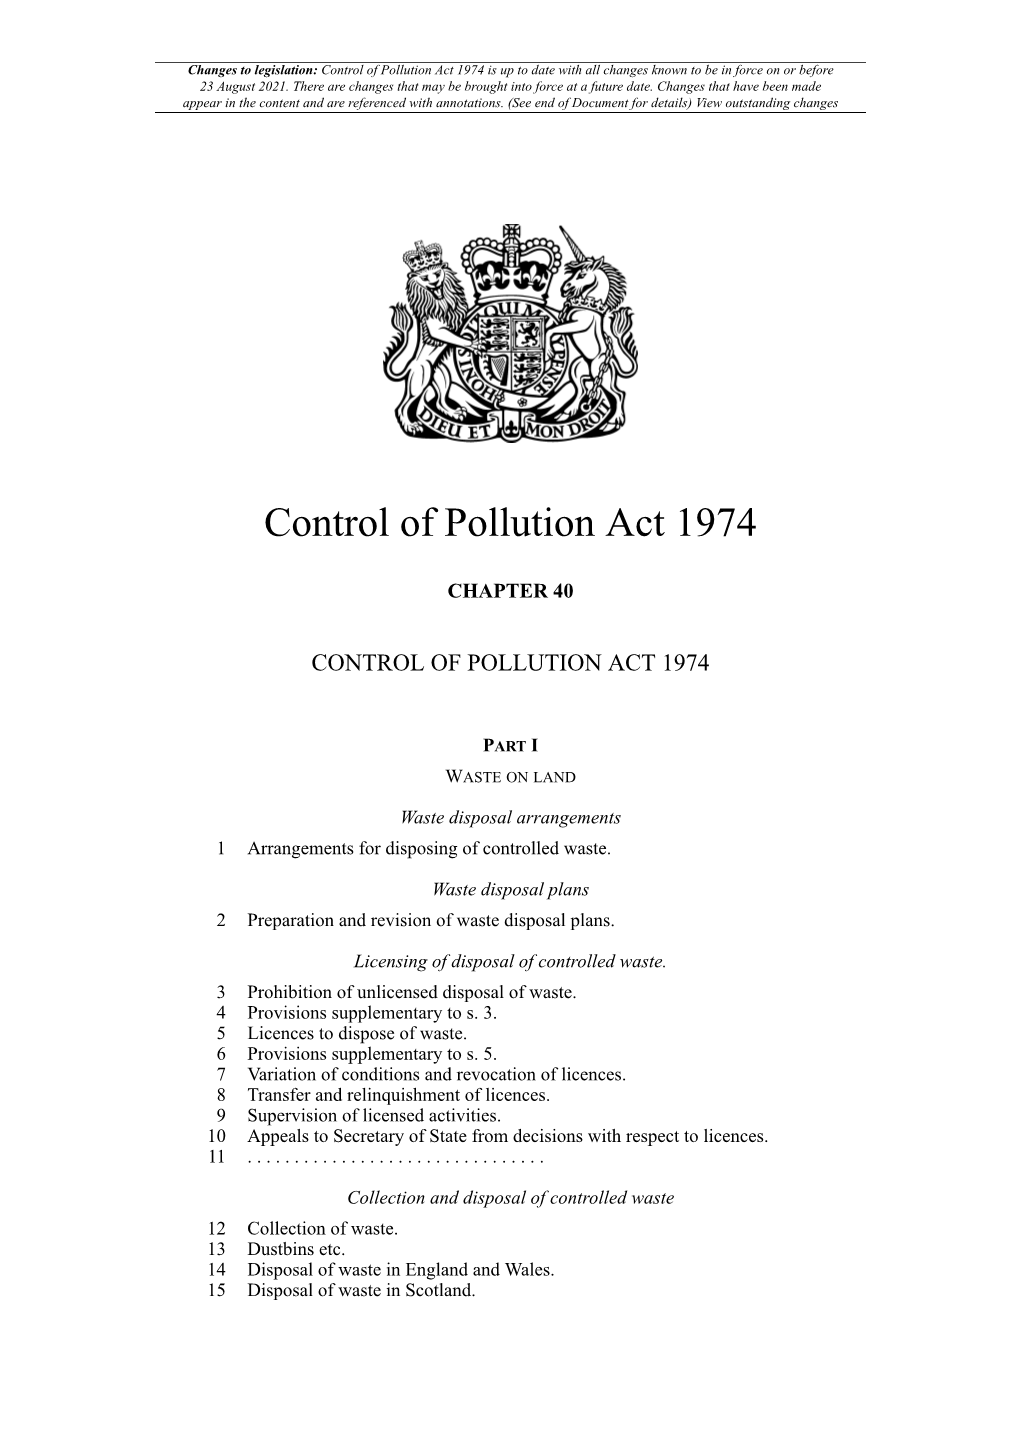 Control of Pollution Act 1974 Is up to Date with All Changes Known to Be in Force on Or Before 23 August 2021